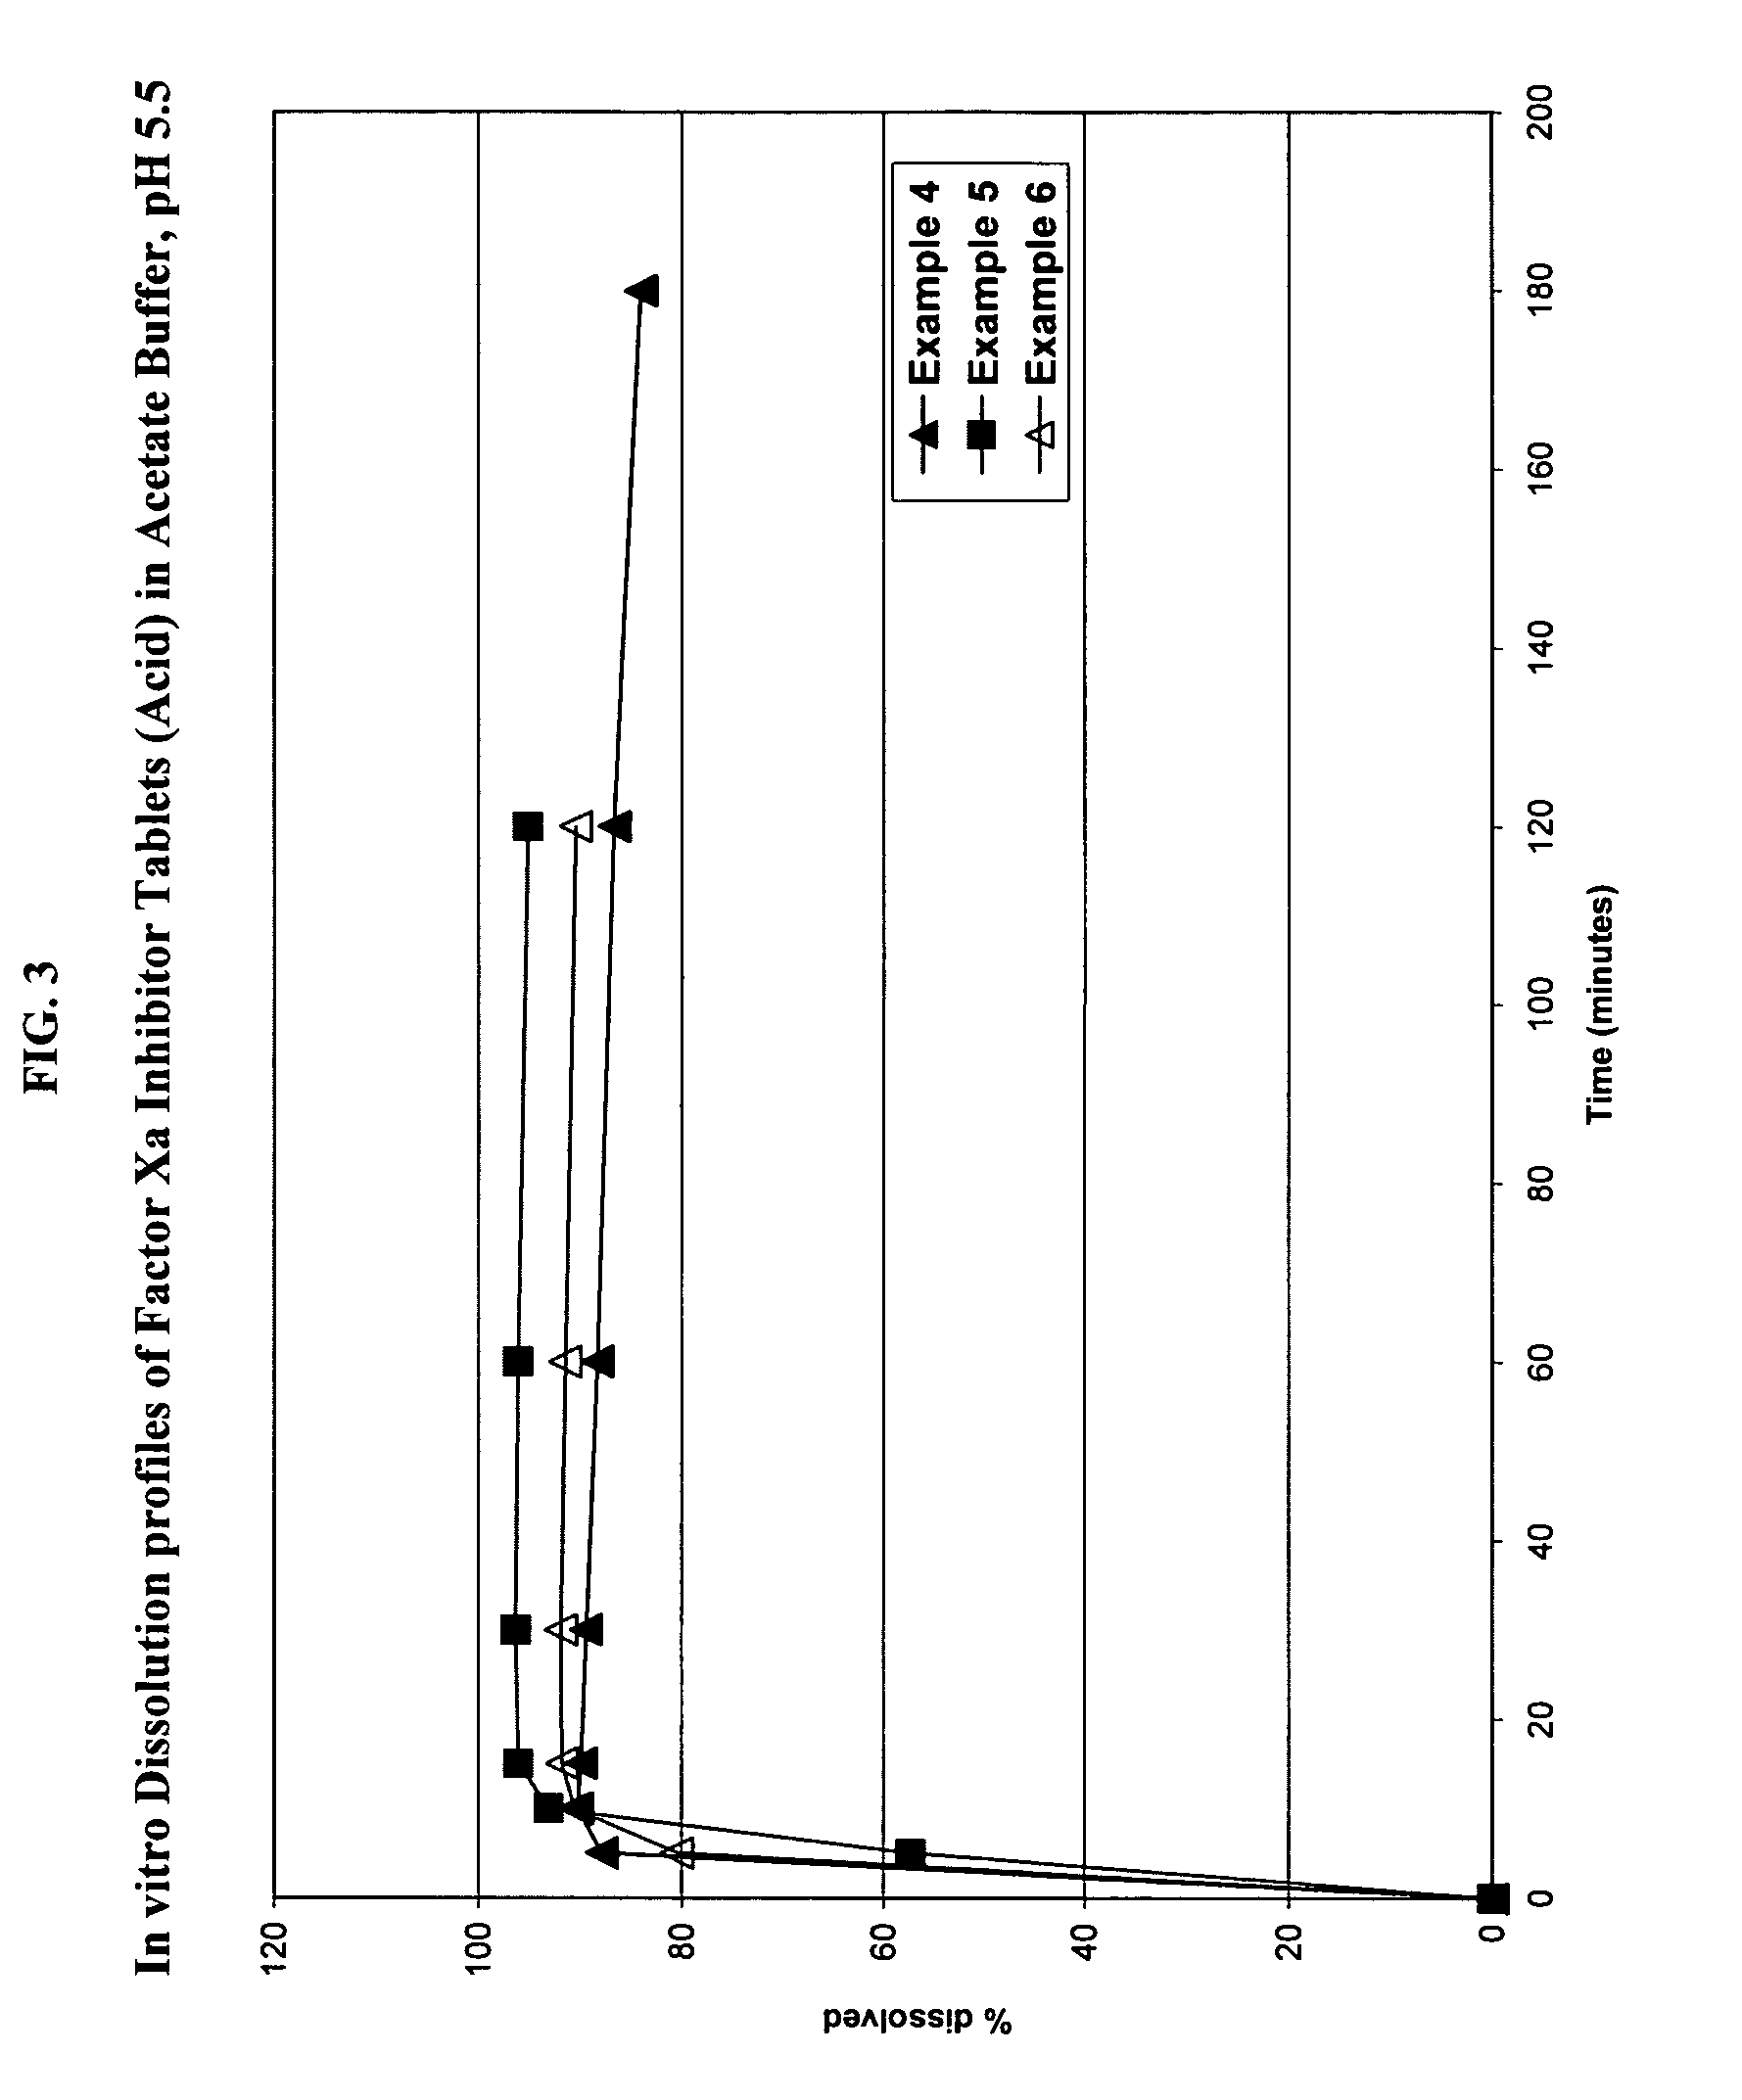 Solid dosage formulation containing a Factor Xa inhibitor and method